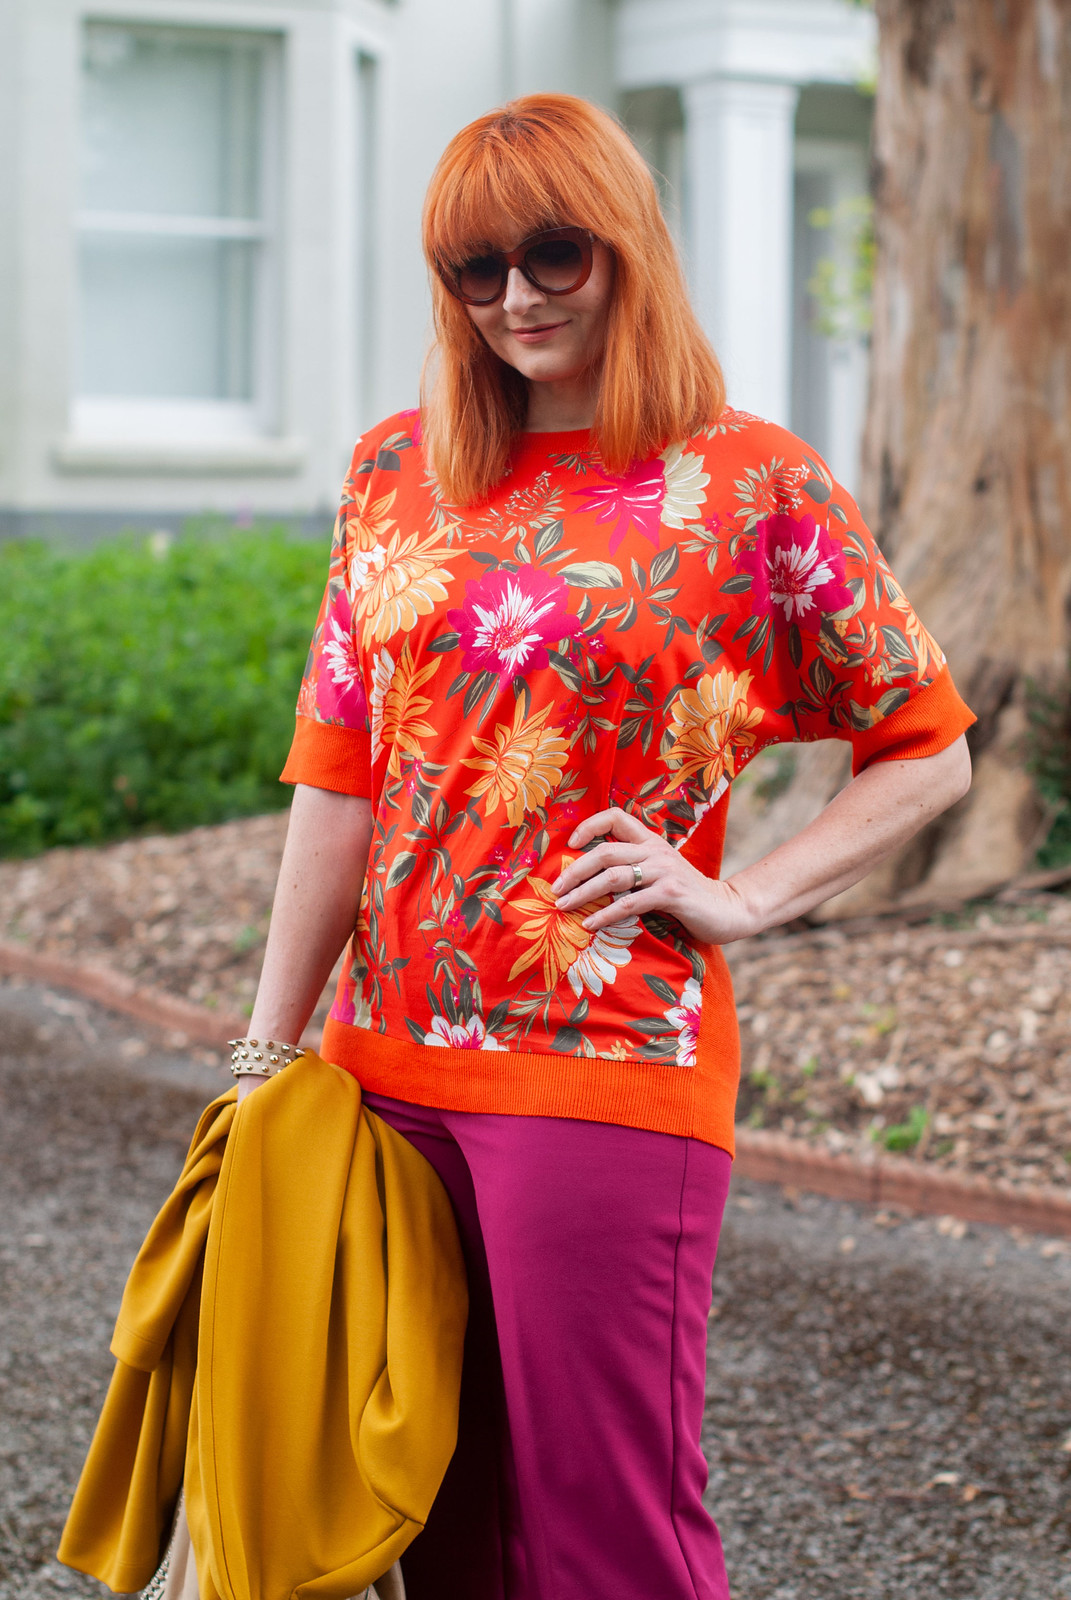 Over 40 Style - All the Bold Colours for Spring/Summer (Yellow, Orange Florals and Magenta) | Not Dressed As Lamb, over 40 fashion blog